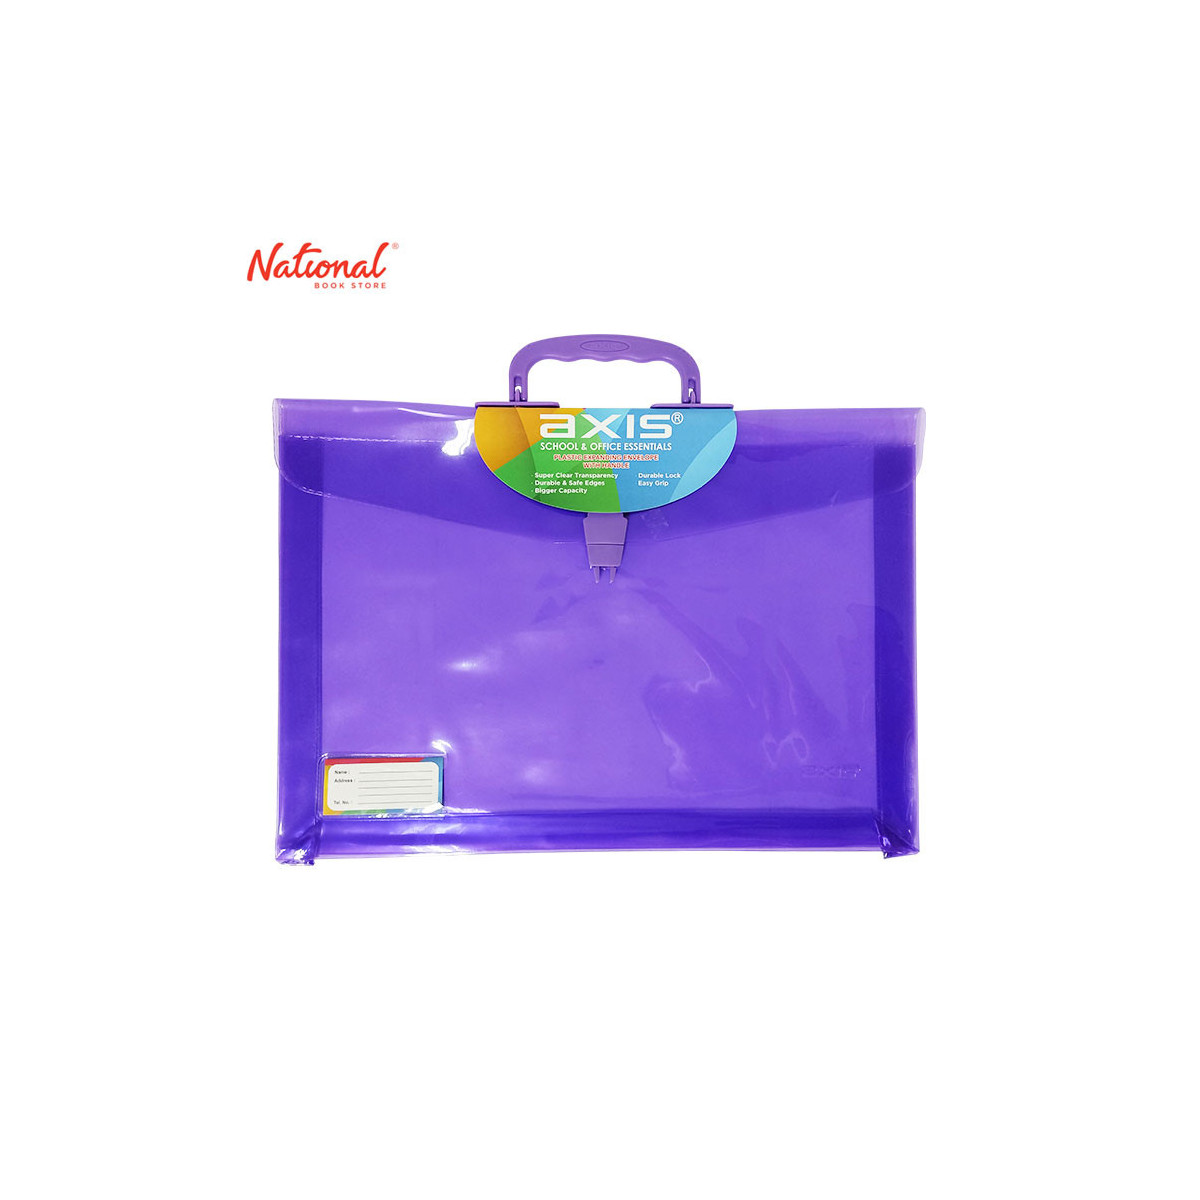 AXIS PLASTIC ENVELOPE WITH HANDLE AX-PEH002 LONG G10 COLORED TRANSPARENT PUSH LOCK EXPANDABLE, VIOLET